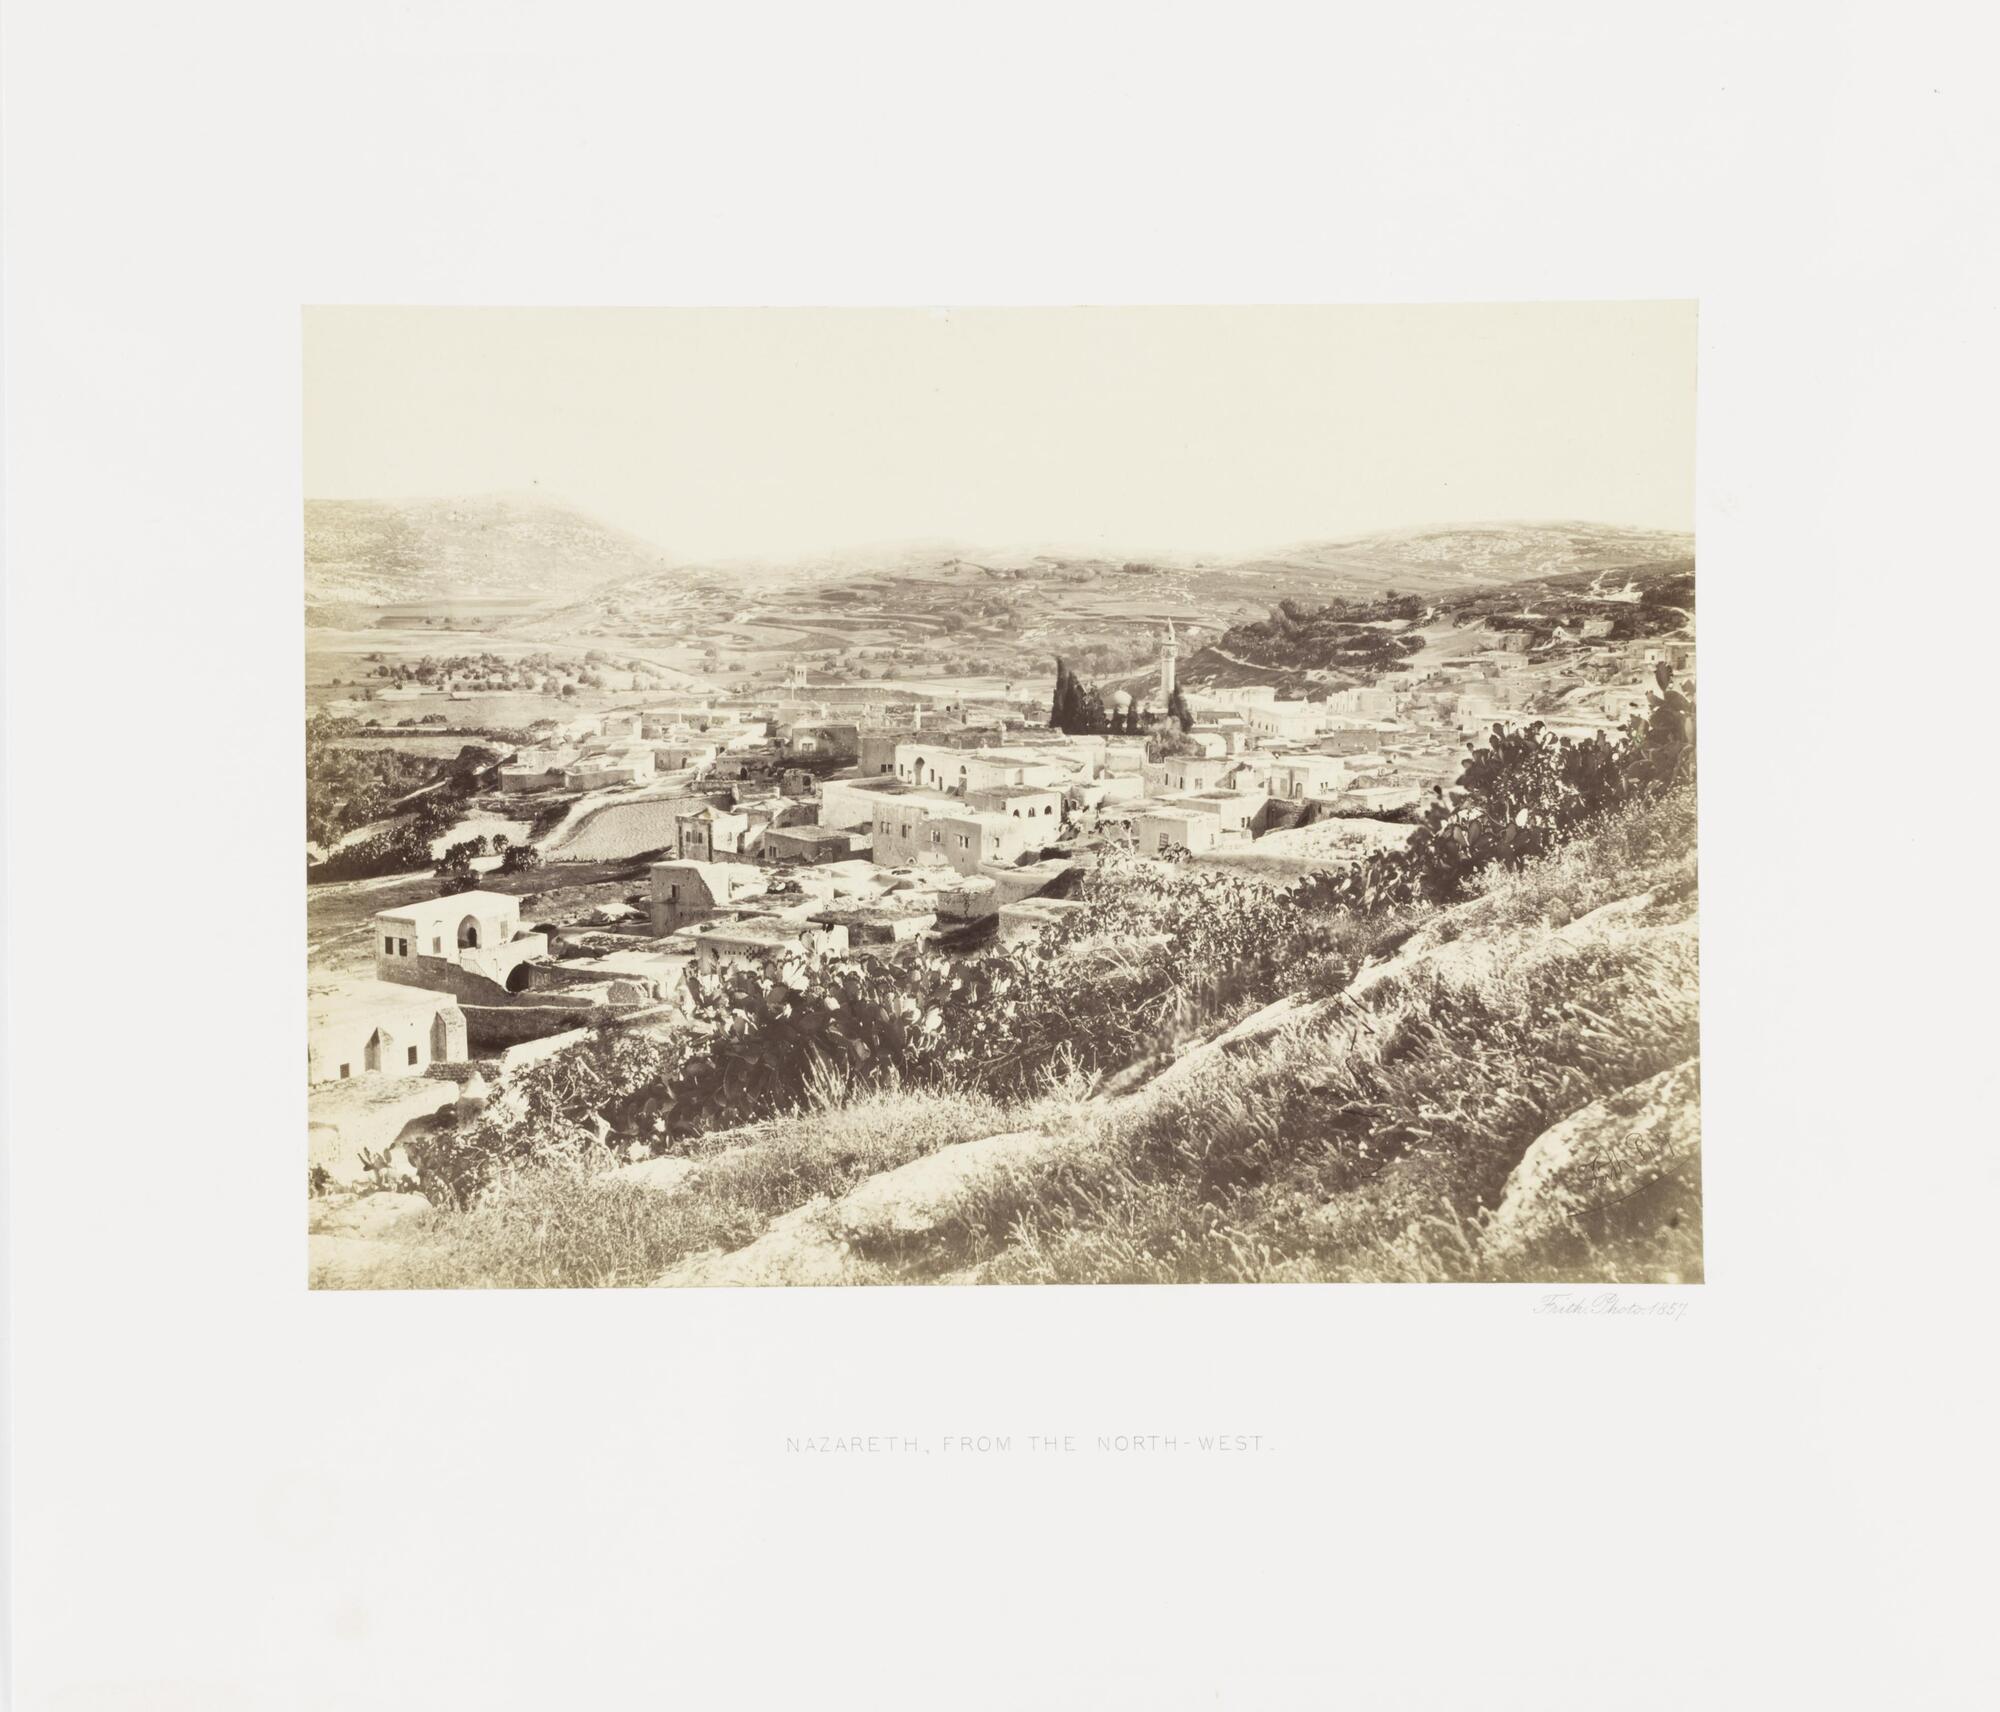 View of a village set in a valley surrounded by several low-rising hills, all of which is seen from an elevated perspective from a hill in the foreground of the image. 